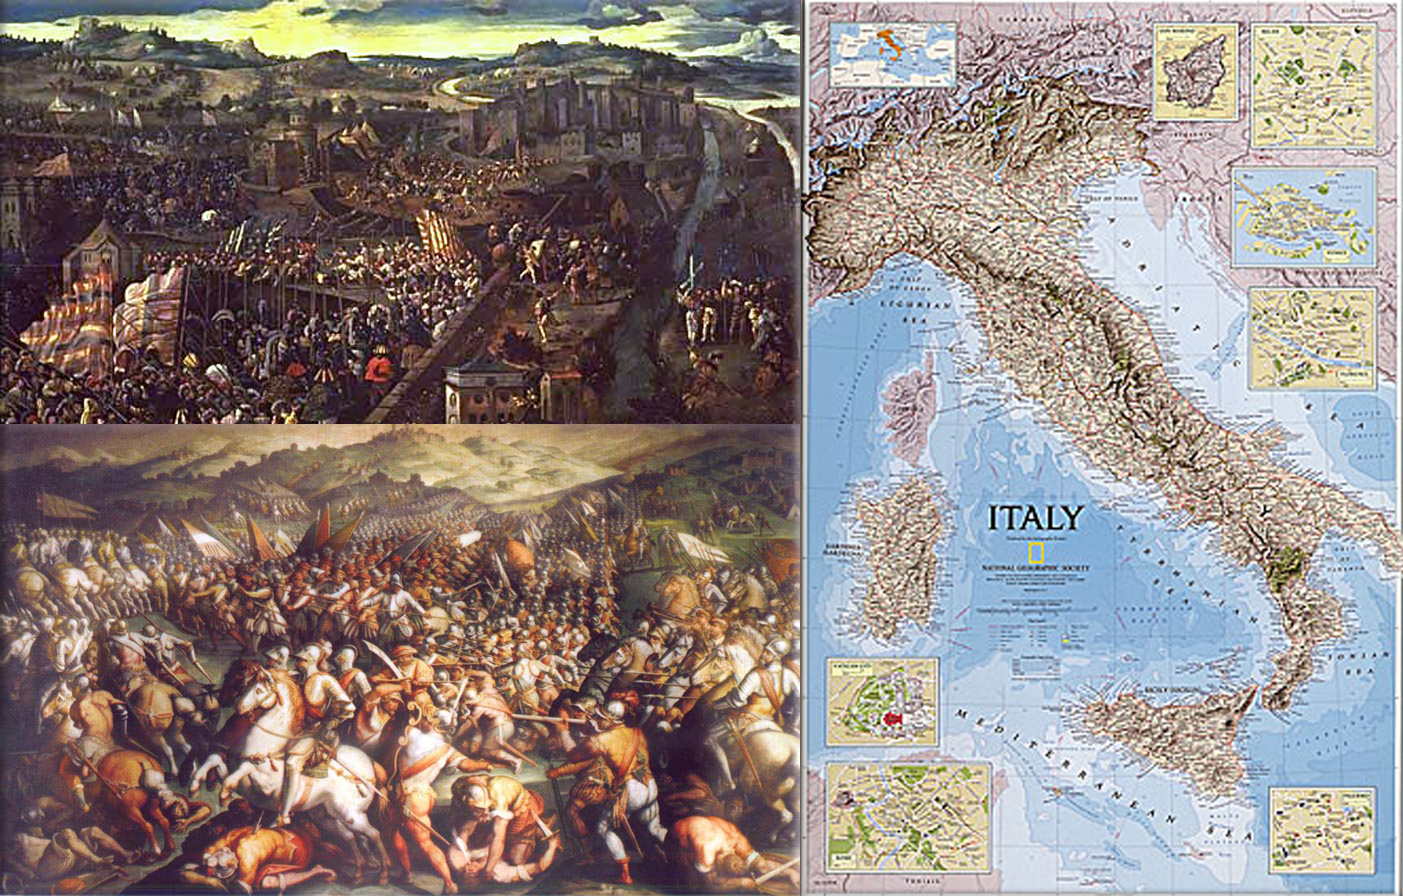 Italian Wars: (Great Italian Wars or The Renaissance Wars), were a series of conflicts from 1494 to 1559 that involved, at various times, most of the city-states of Italy, the Papal States, most of the major states of Western Europe (France, Spain, the Holy Roman Empire, England, and Scotland) as well as the Ottoman Empire.